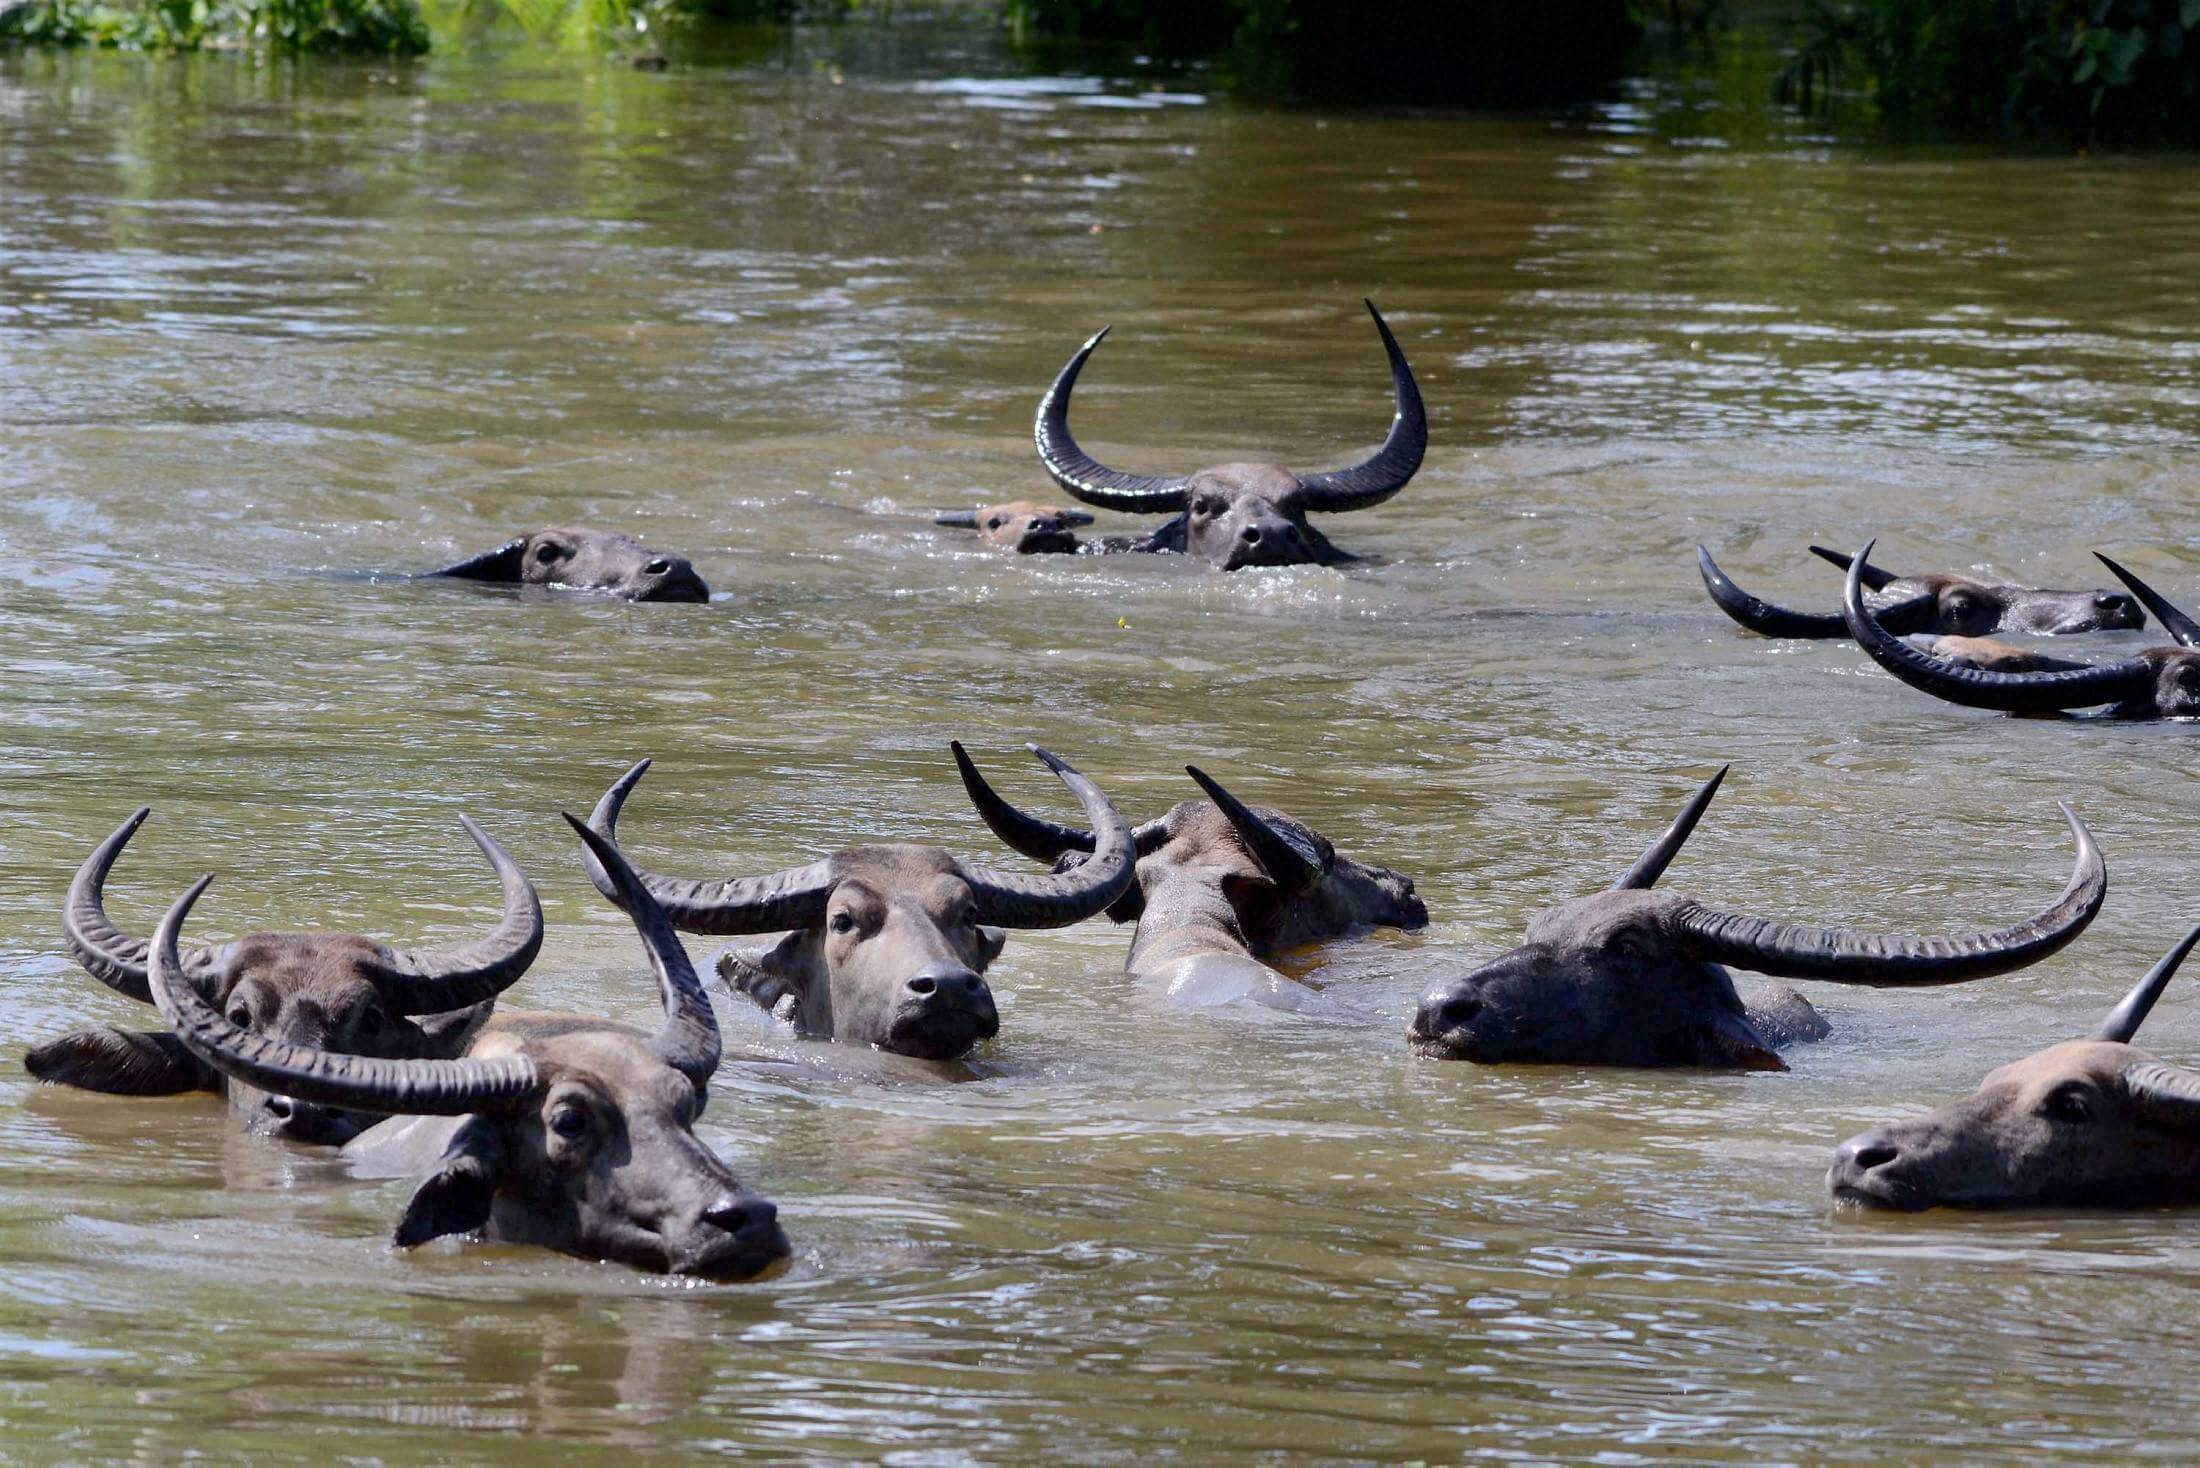 From The Flooded Kaziranga Over 100 Wild Animals Have Been Rescued